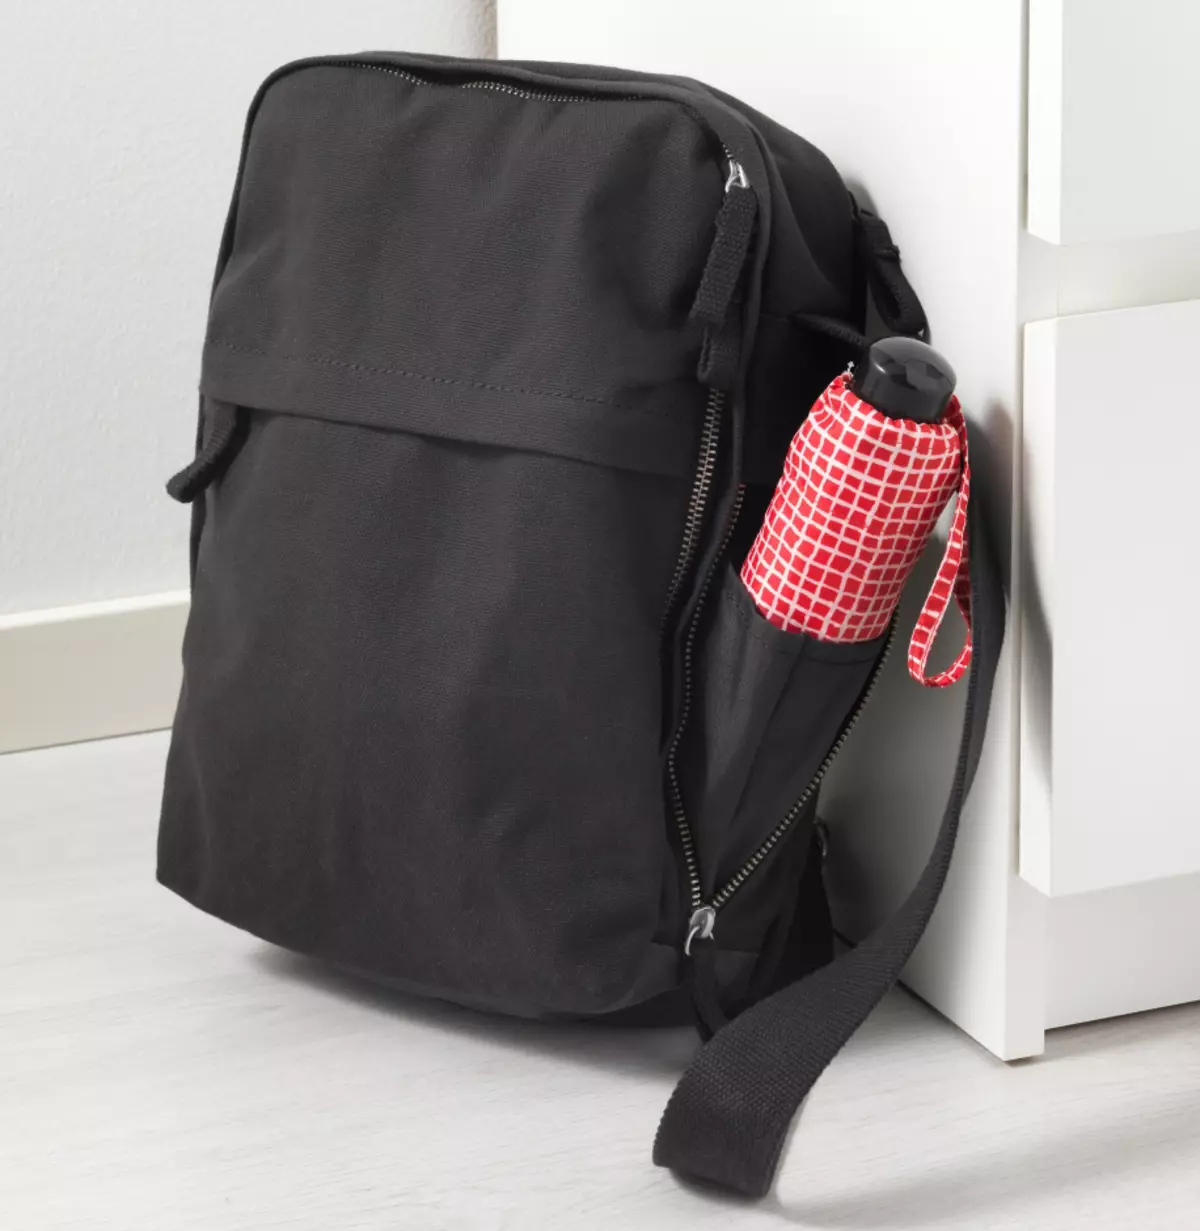 IKEA backpacks: overview of the black backpack-suitcase on wheels and other models, how to care 15421_14